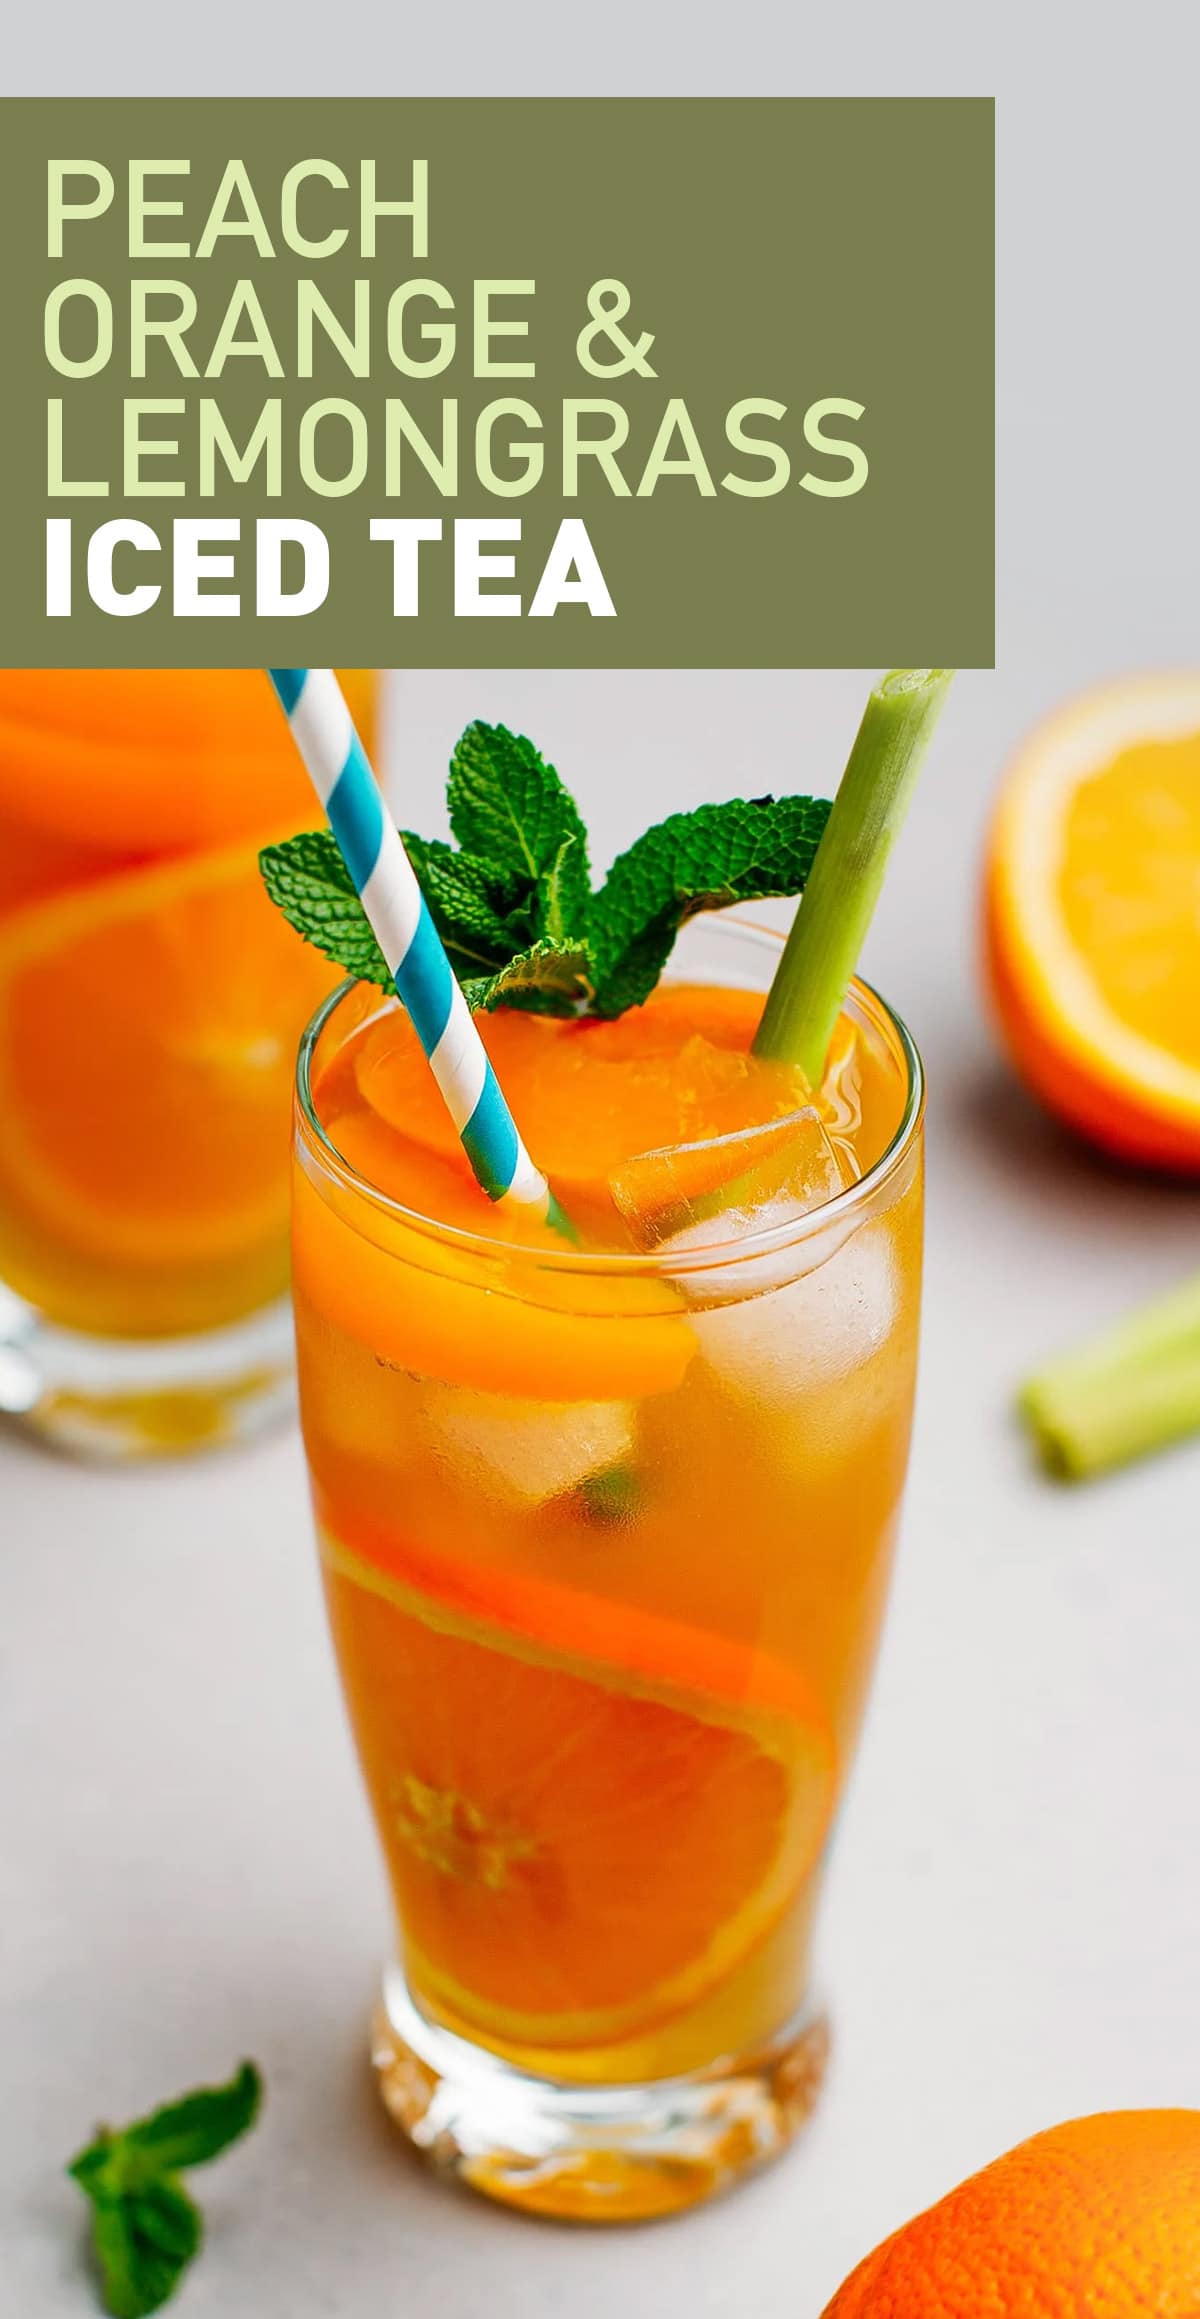 Looking for a refreshing and healthy drink to enjoy this summer? Look no further than our Vietnamese-inspired peach, orange, and lemongrass iced tea! This classic iced tea has a floral and citrusy aroma that will surely satisfy your thirst! #icedtea